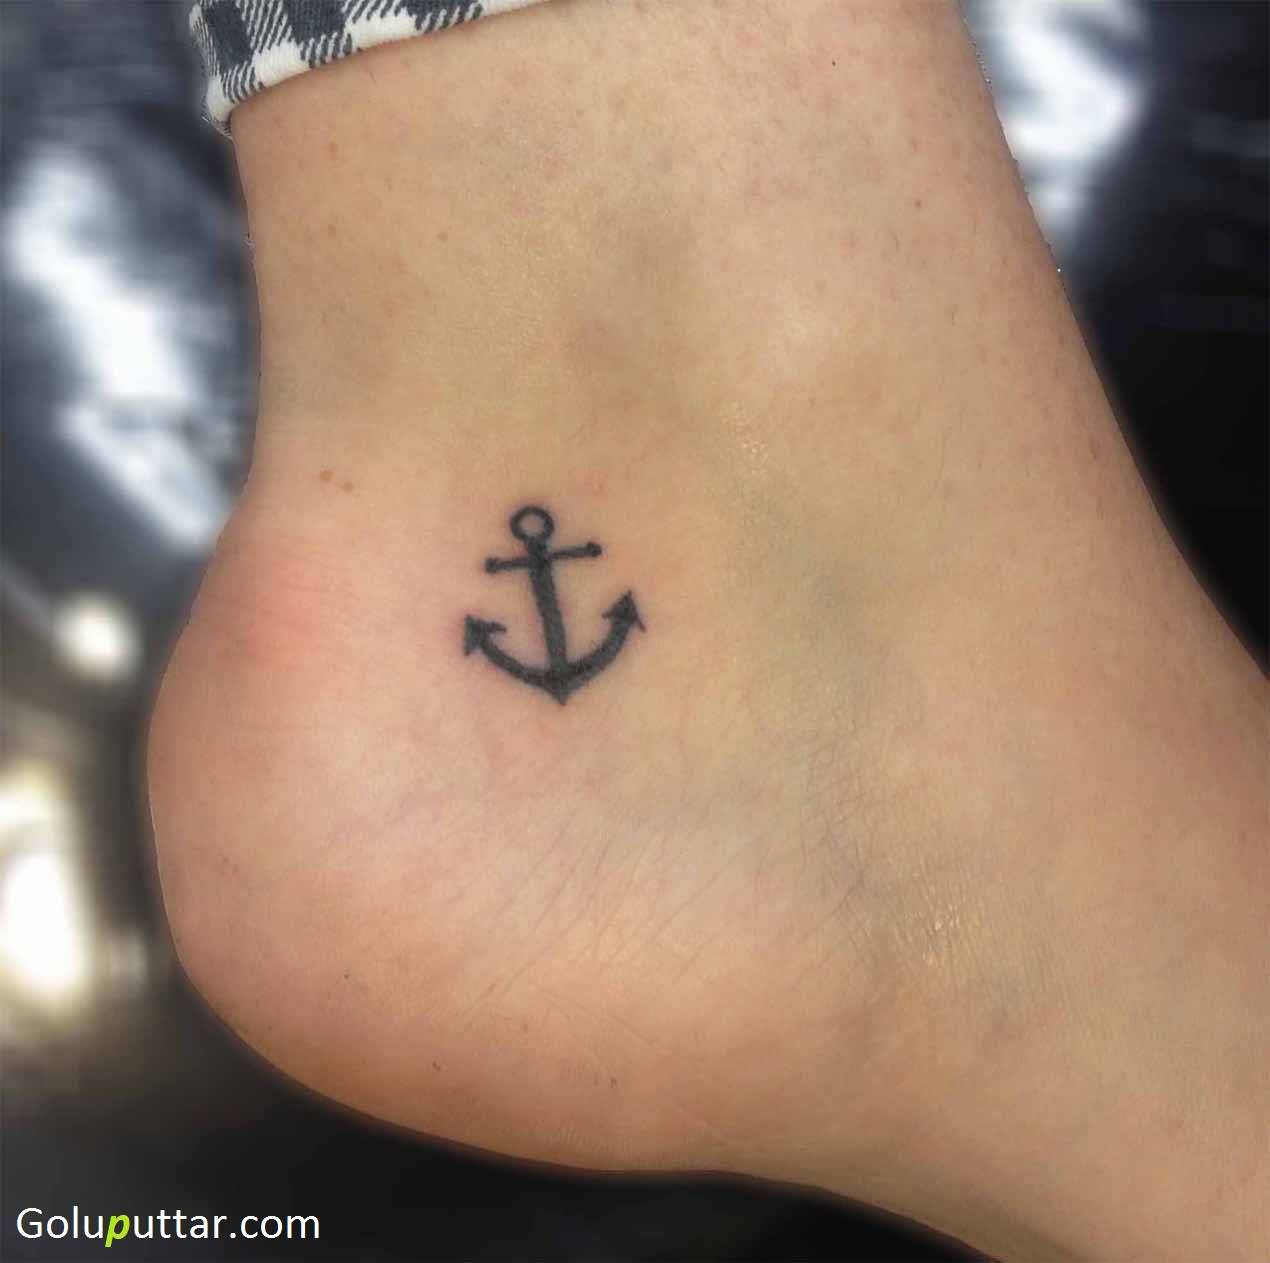 Awesome Black Ink Anchor Tattoo On Right Ankle